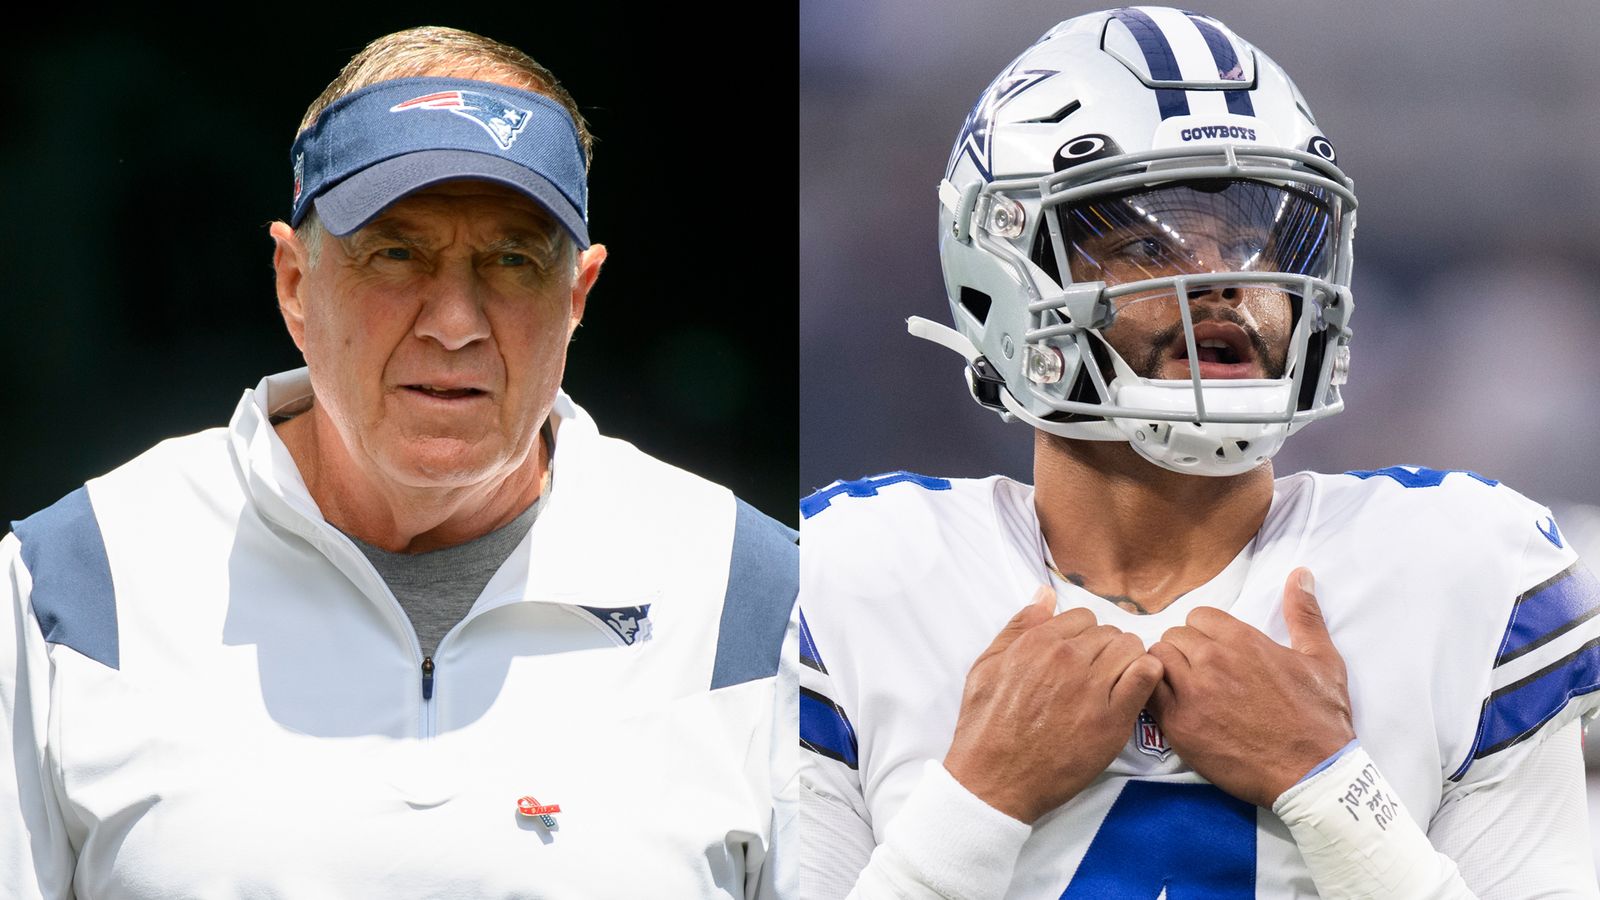 New England Patriots and Dallas Cowboys: Are both teams in trouble after disappointing season-opening defeats?